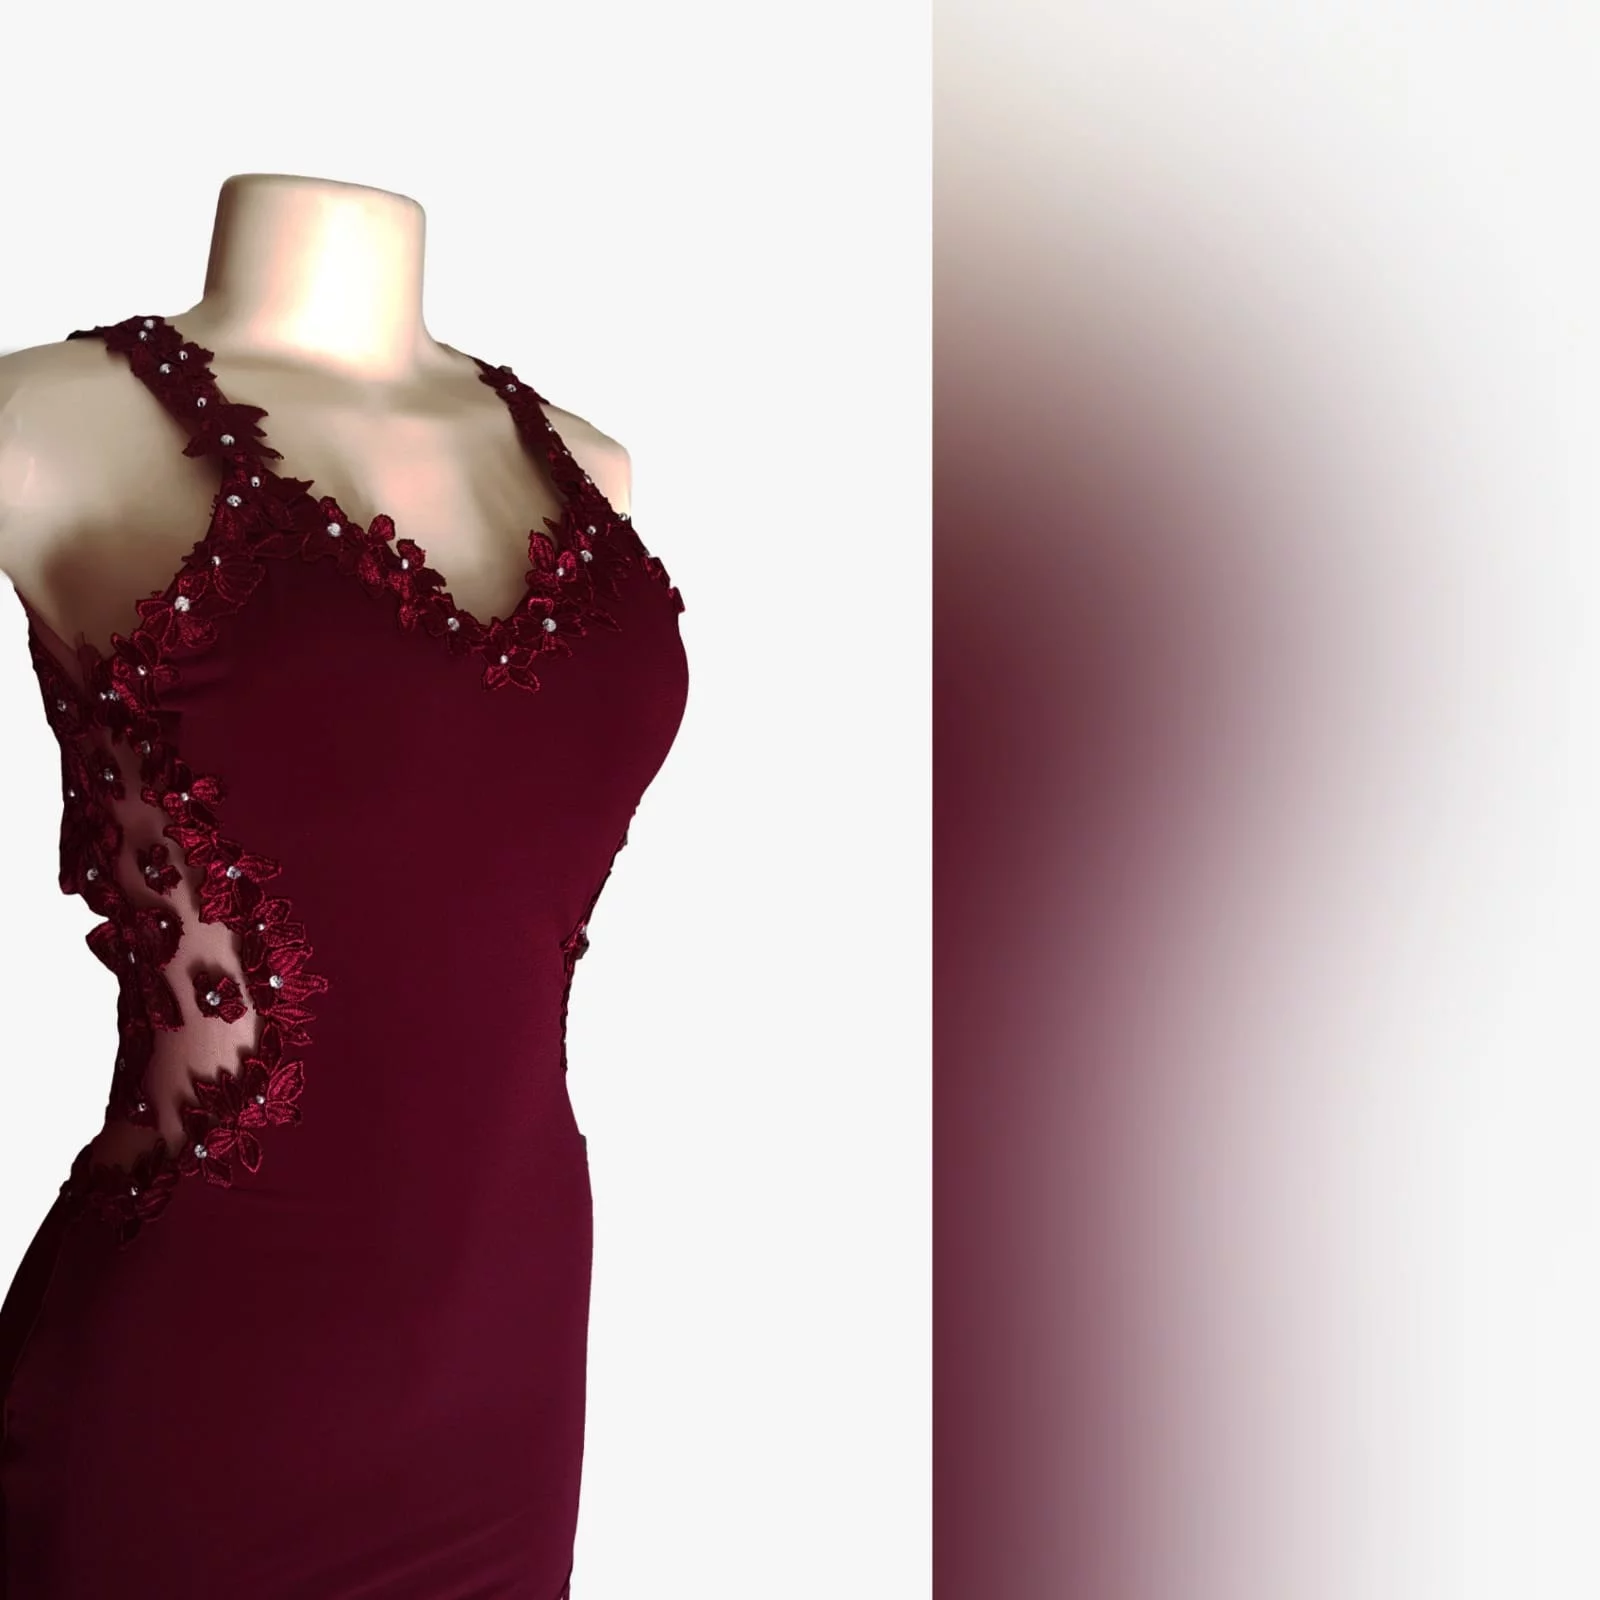 Burgundy long sexy prom dress 7 burgundy long sexy prom dress with an illusion lace low back and side tummy. Sweetheart neckline detailed with lace. With a slit and a train.